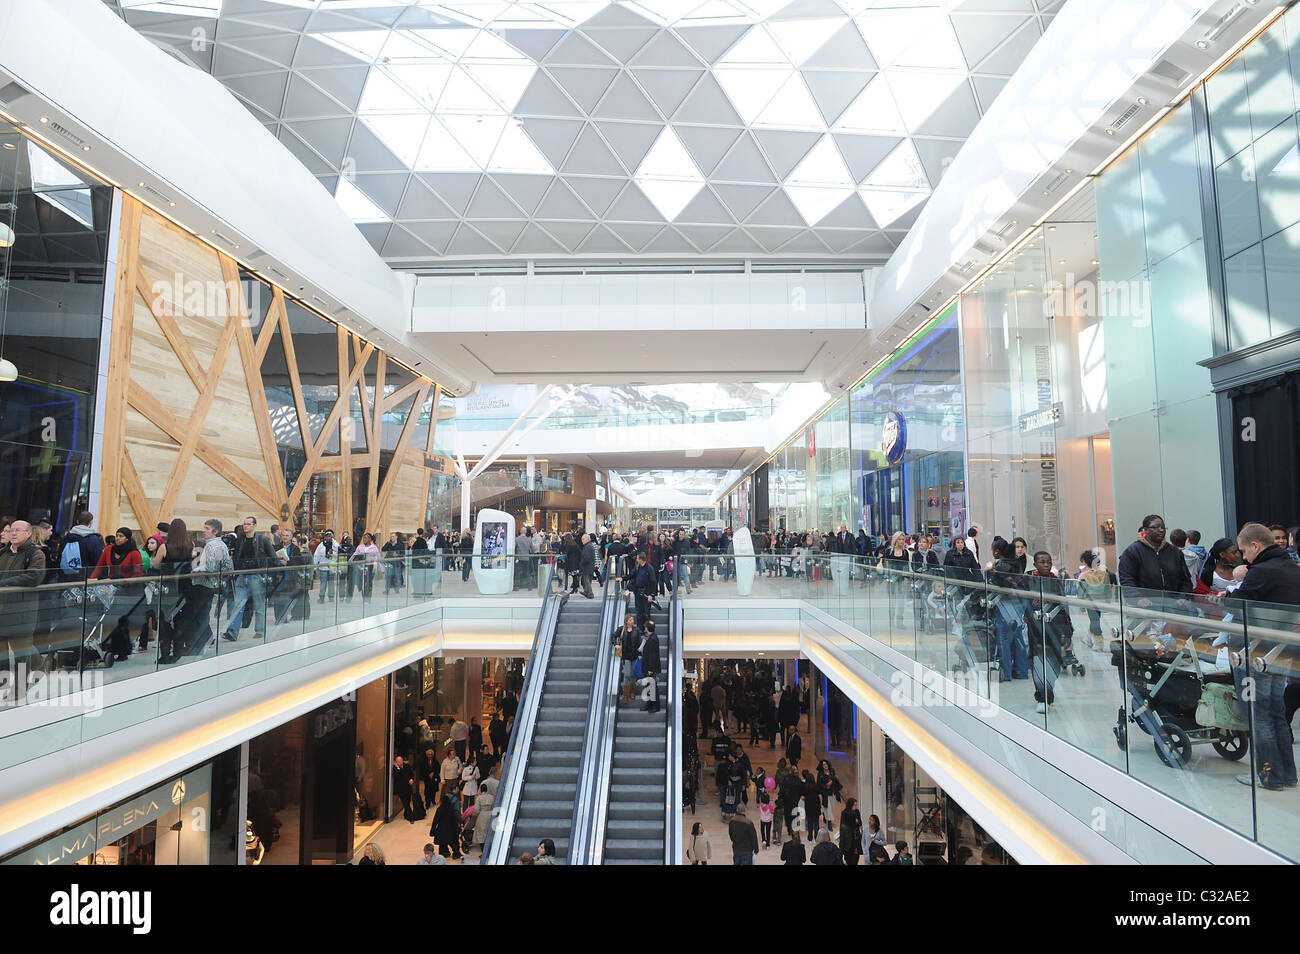 Westfield London now largest shopping centre in Europe with launch